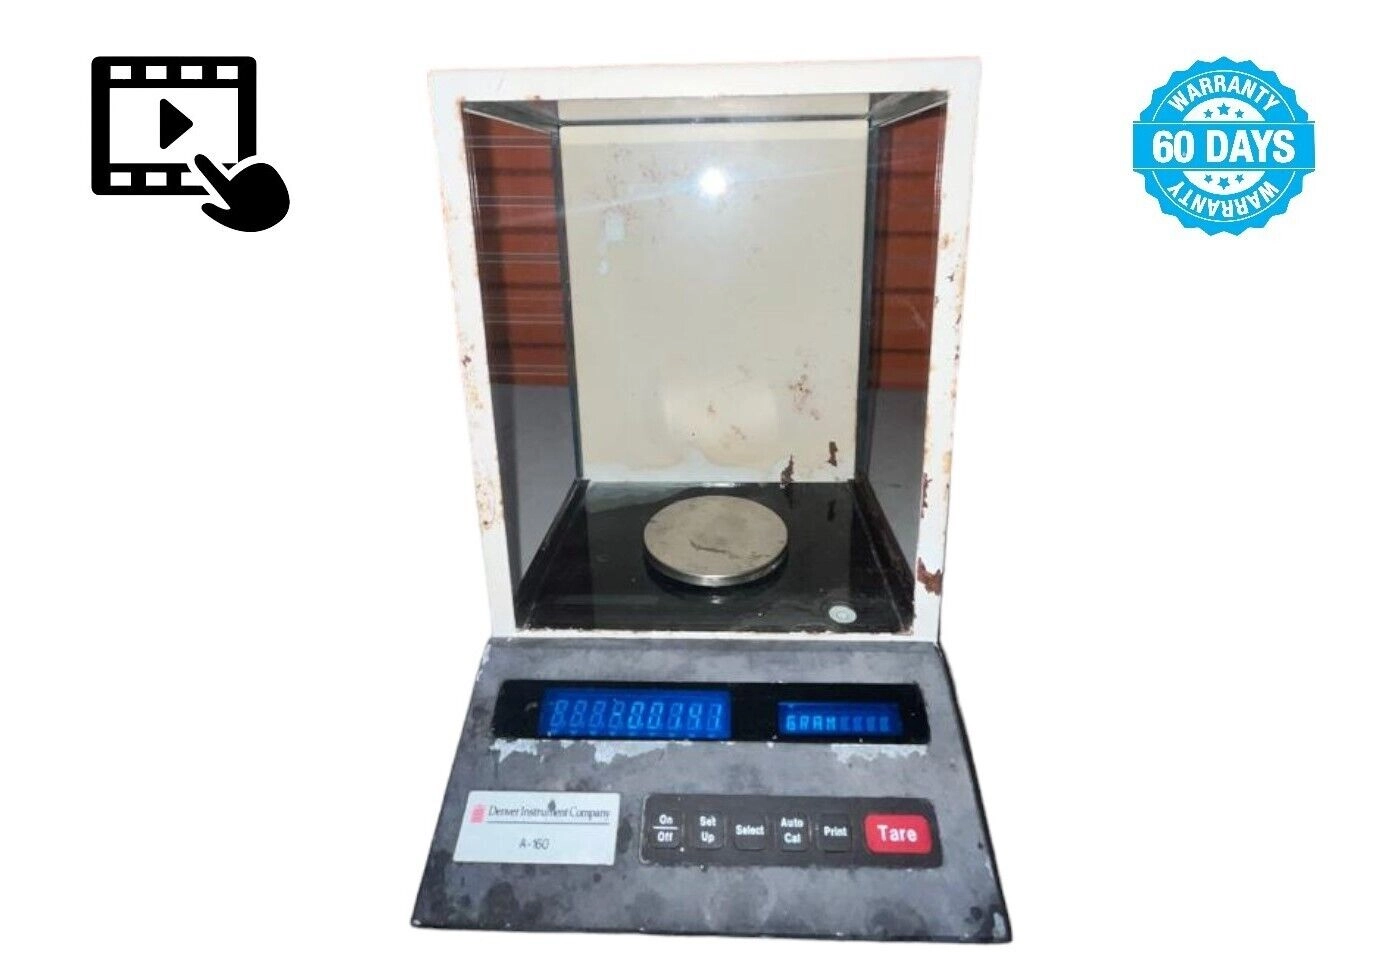 Denver Instrument Company Scale A-160 Analytical B